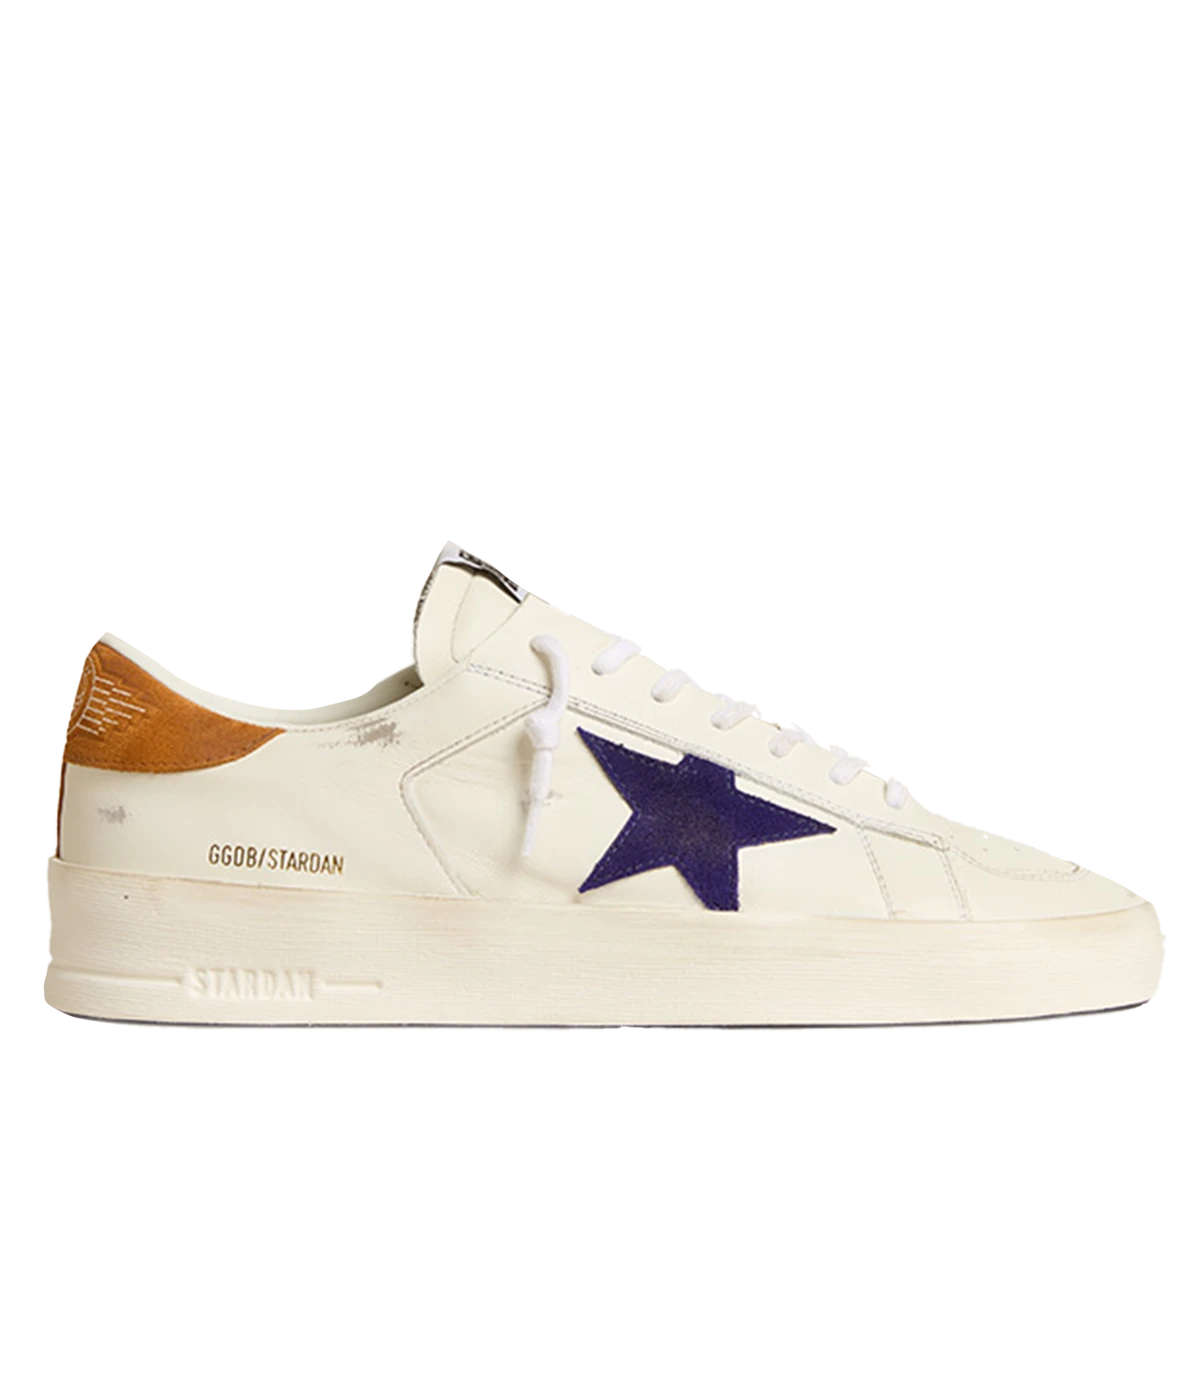 Stardan Sneaker in White, Deep Blue & Cathay Spice